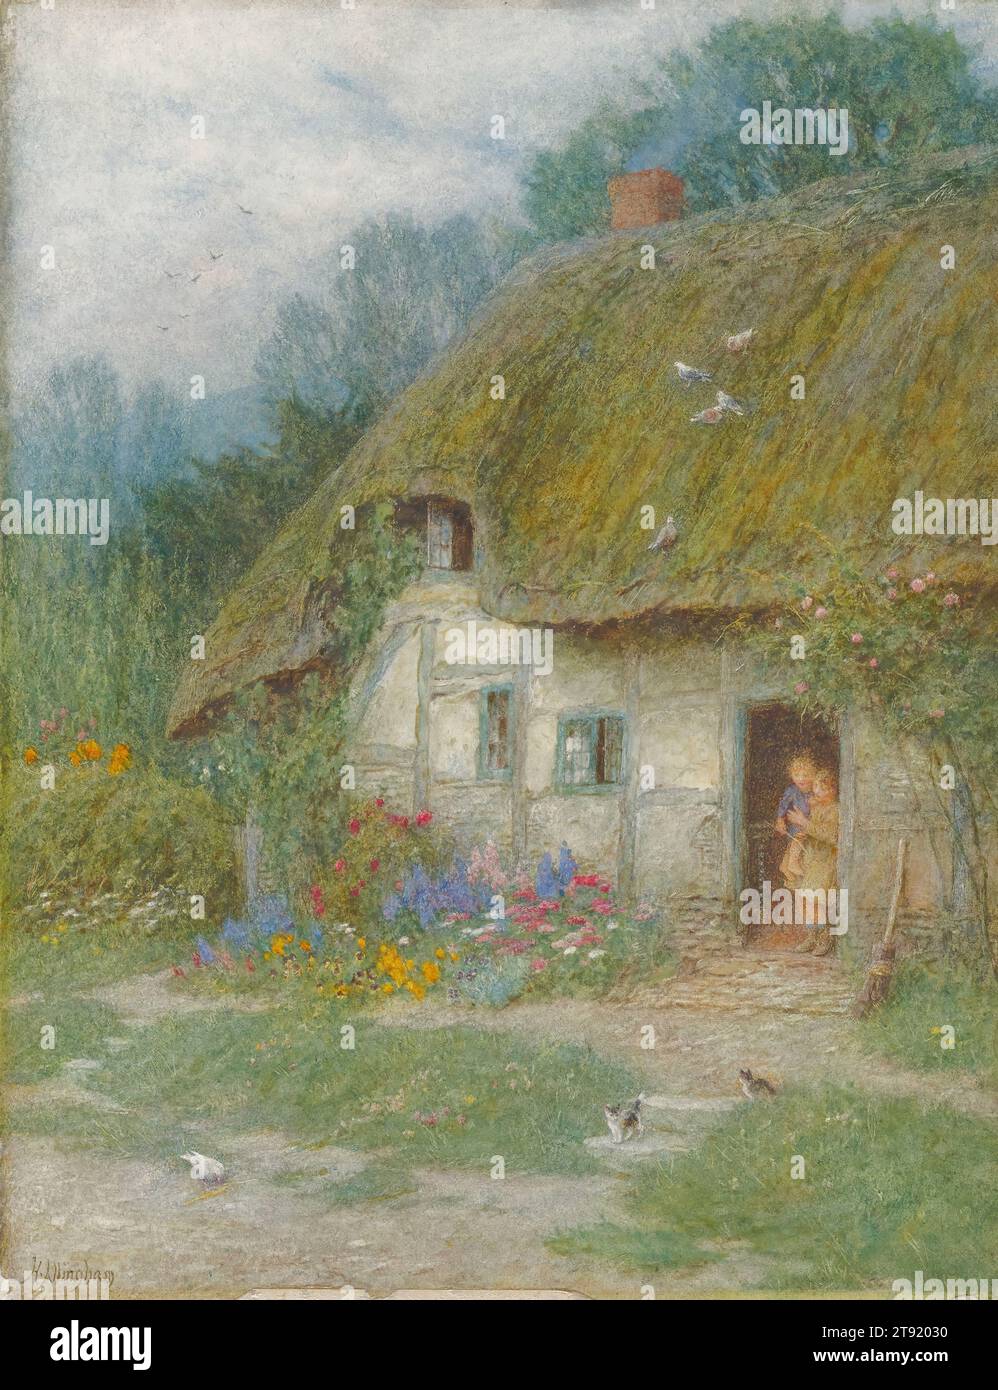 A Wiltshire Cottage, 19th-20th century, Helen Allingham, English, 1848 - 1926, 12 1/2 x 9 5/8 in. (31.75 x 24.45 cm) (sight)20 x 16 11/16 in. (50.8 x 42.39 cm) (outer frame), Watercolor over graphite, England, 19th-20th century, Widowed at age 41 and feeling financial pressure to support her three young children, Helen Allingham stepped up her output of watercolors, most of which featured rural cottages and gardens. Her watercolors were wildly popular yet also polarizing. Their popularity may have arisen from the nostalgic needs of those departing to to far-flung colonies Stock Photo